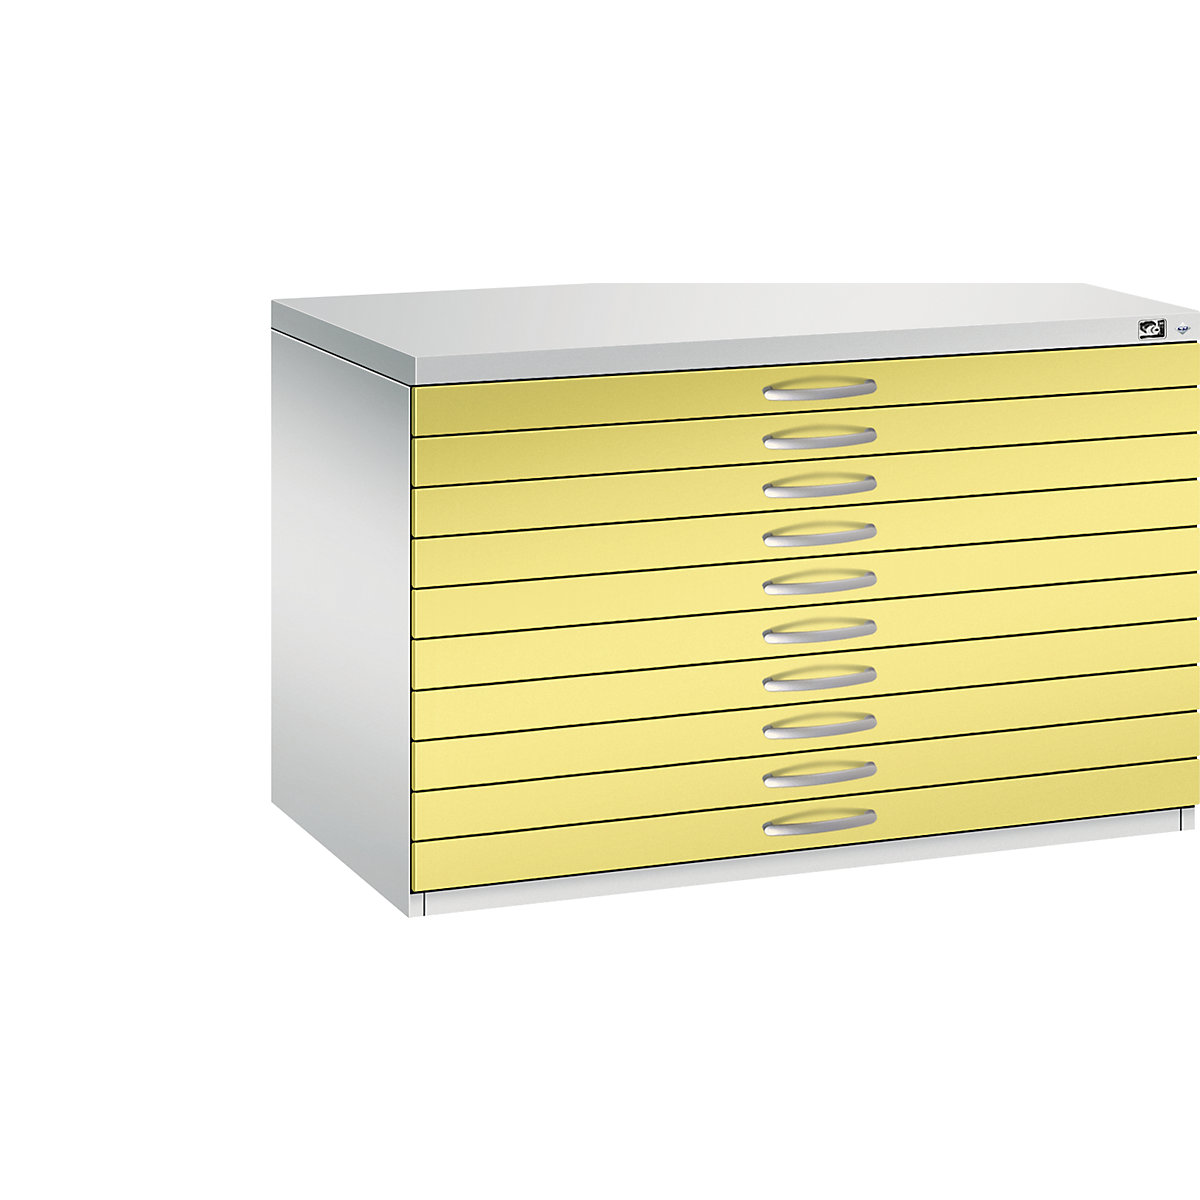 Drawing cabinet – C+P, A1, 10 drawers, height 760 mm, light grey / sulphur yellow-15